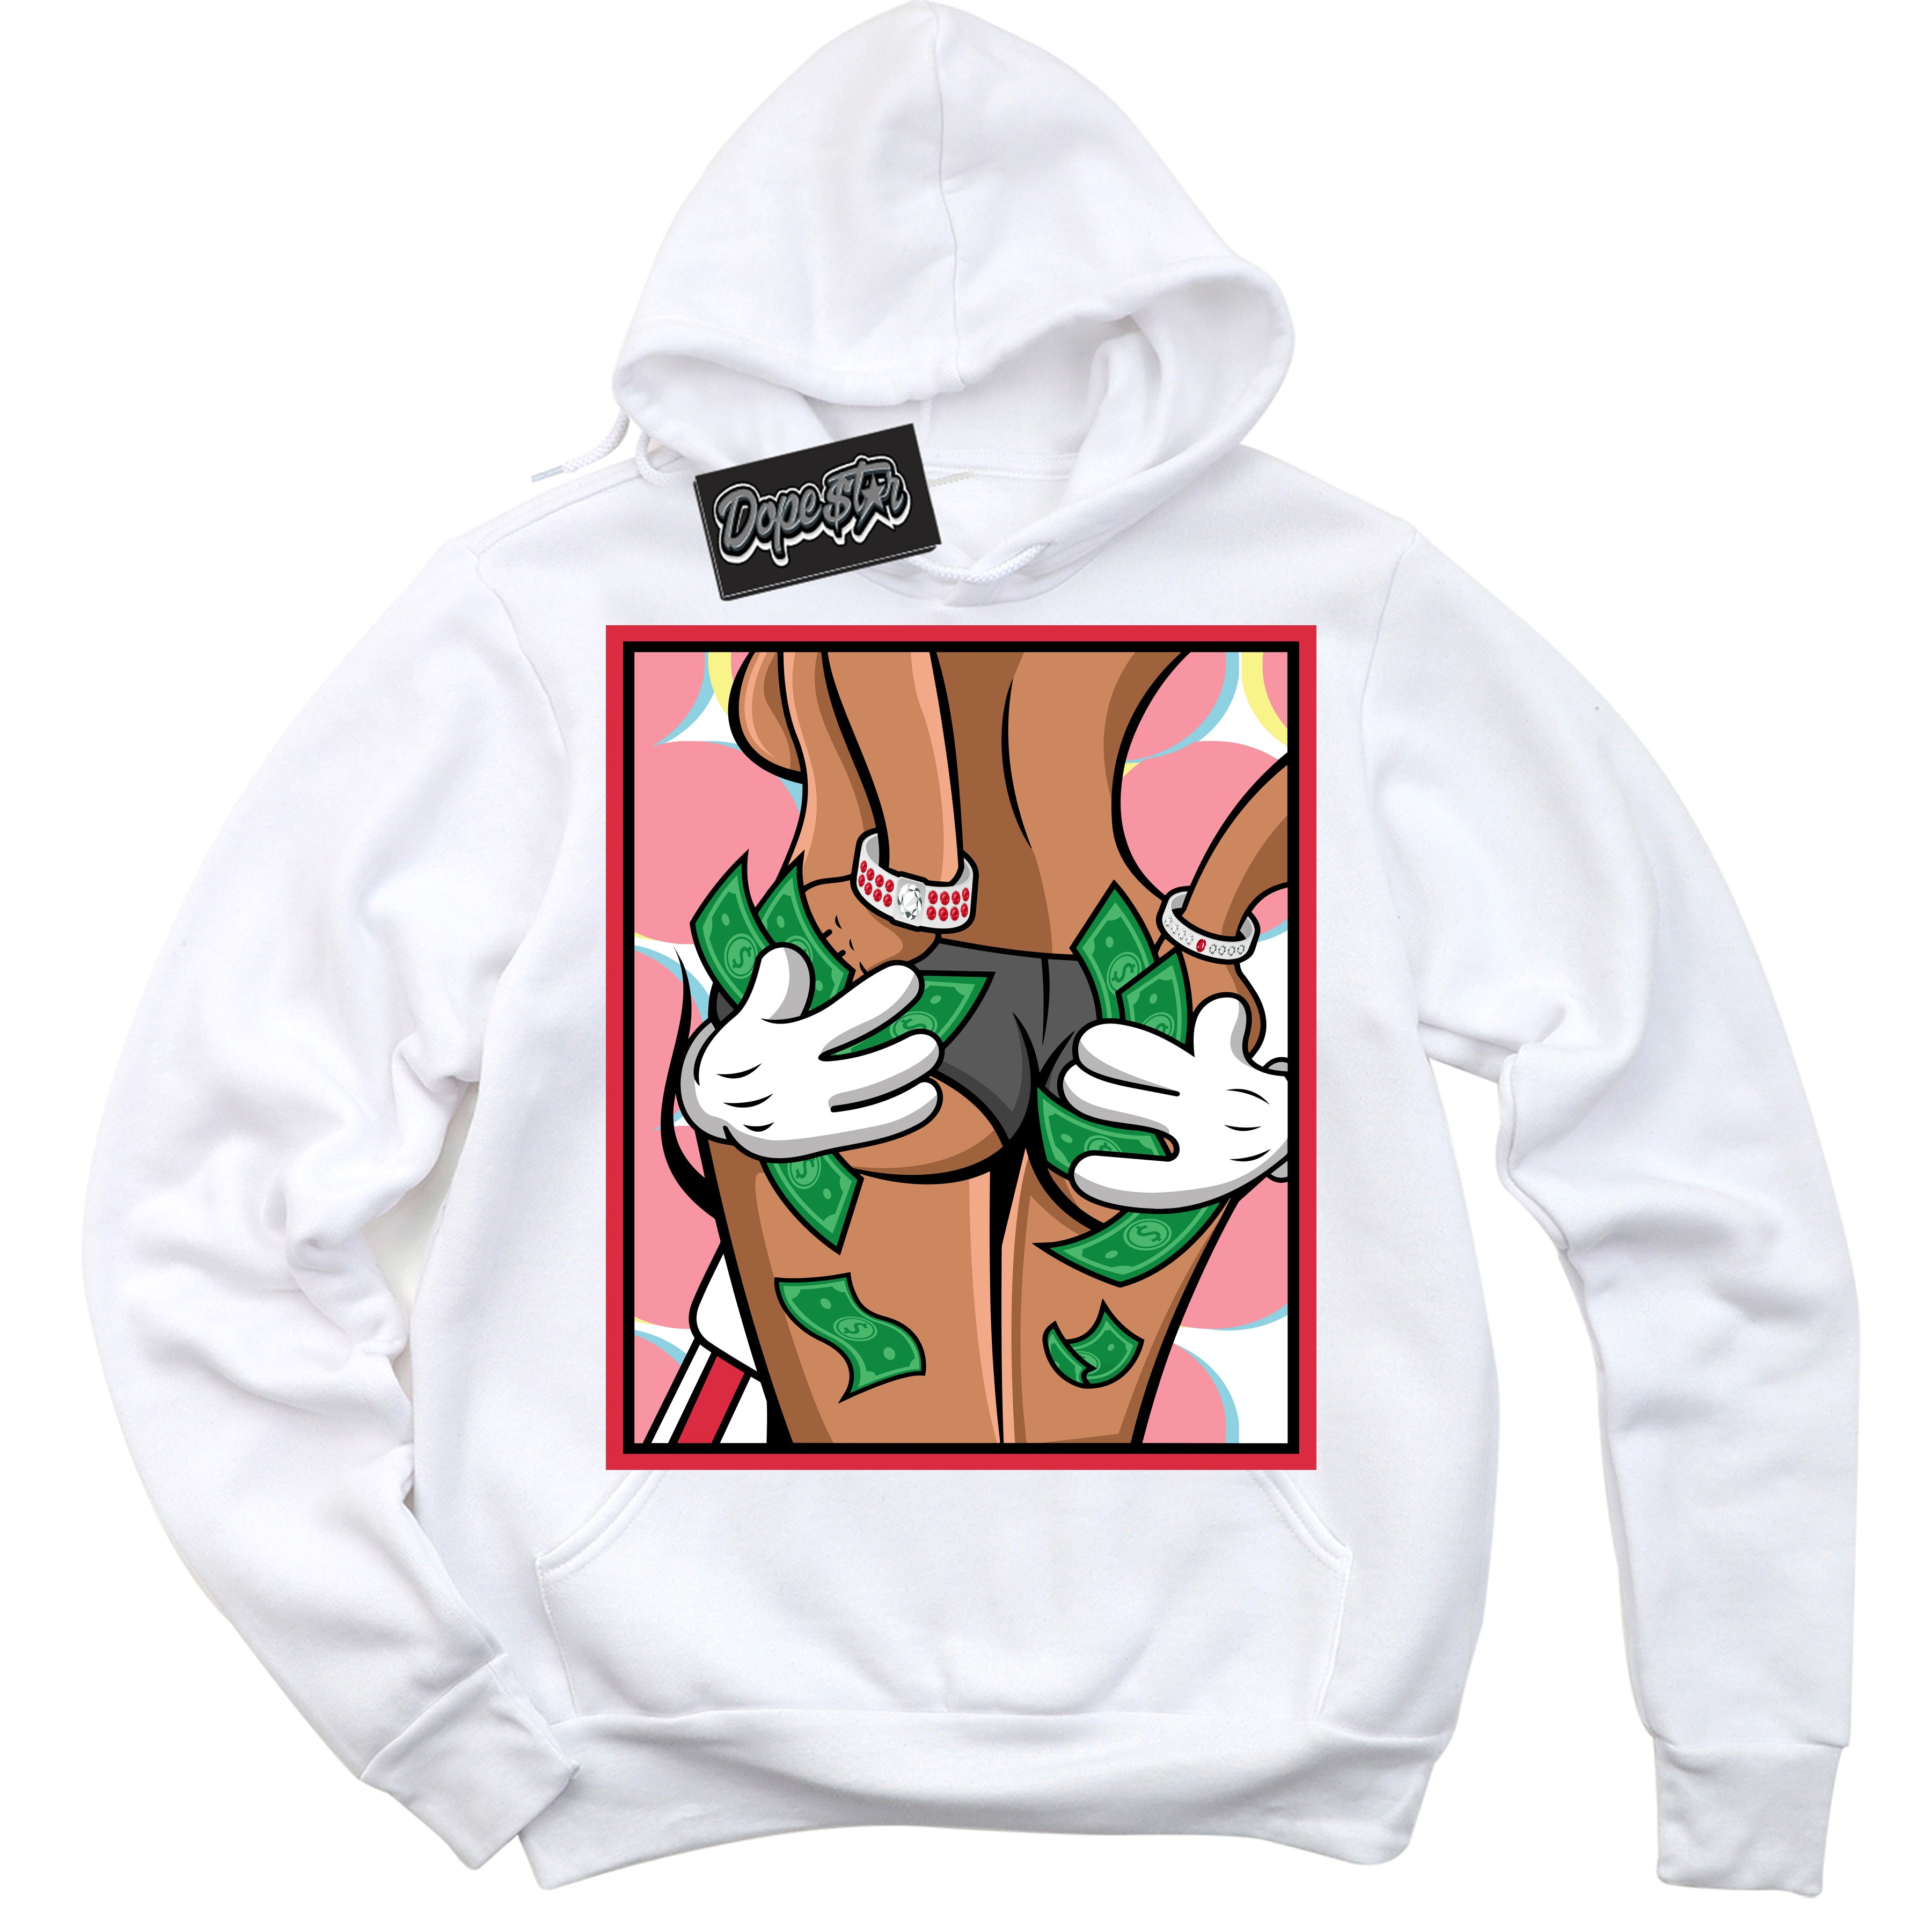 Cool White Graphic DopeStar Hoodie with “ Money Hands “ print, that perfectly matches Spider-Verse 1s sneakers